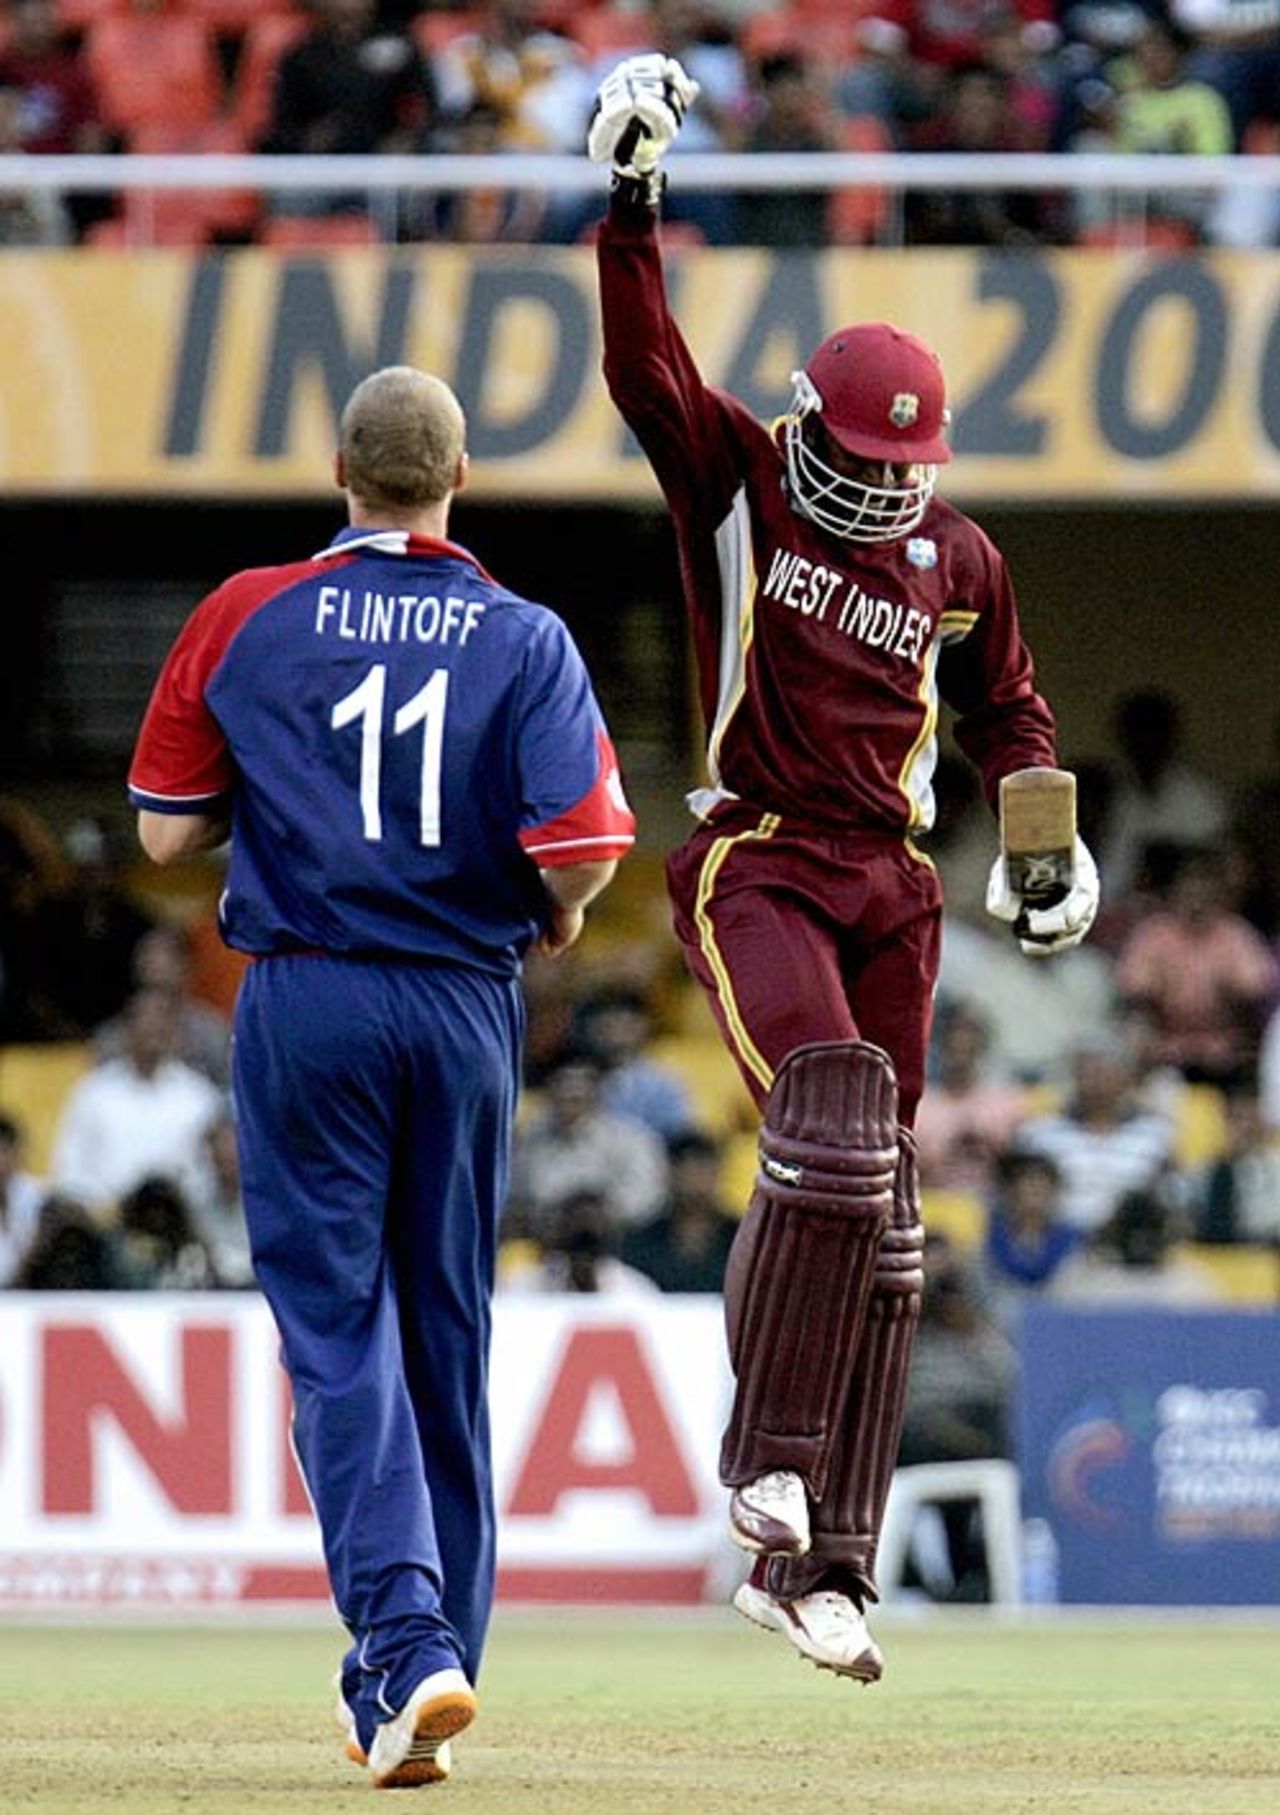 One man's joy, another man's...Chris Gayle scores his 100th run off Andrew Flintoff, England v West Indies, 17th match, Champions Trophy, Ahmedabad, October 28, 2006